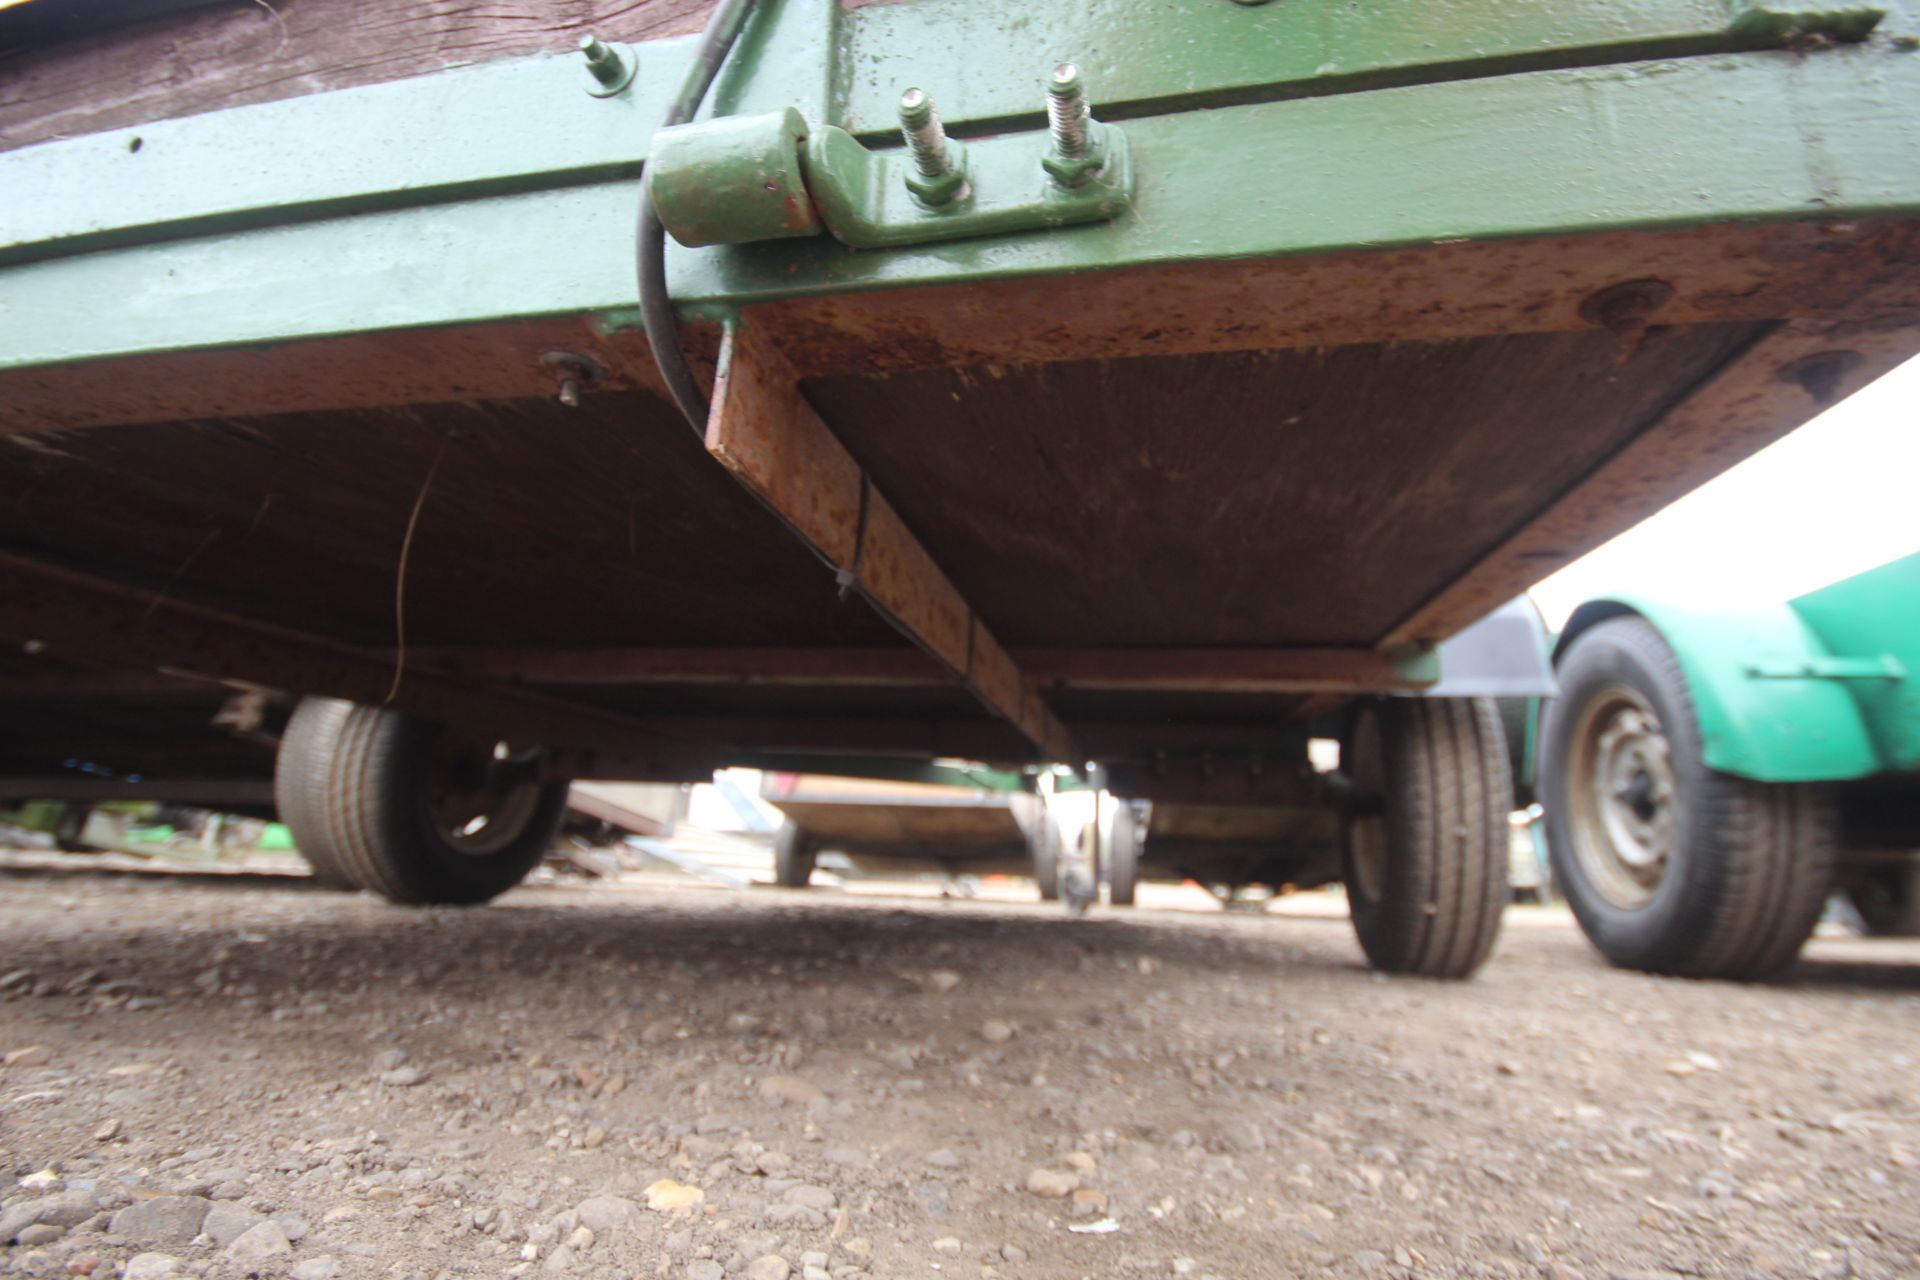 8ft x 4ft single axle car trailer. With ladder rack, lights and spare wheel. Key held. - Image 12 of 18